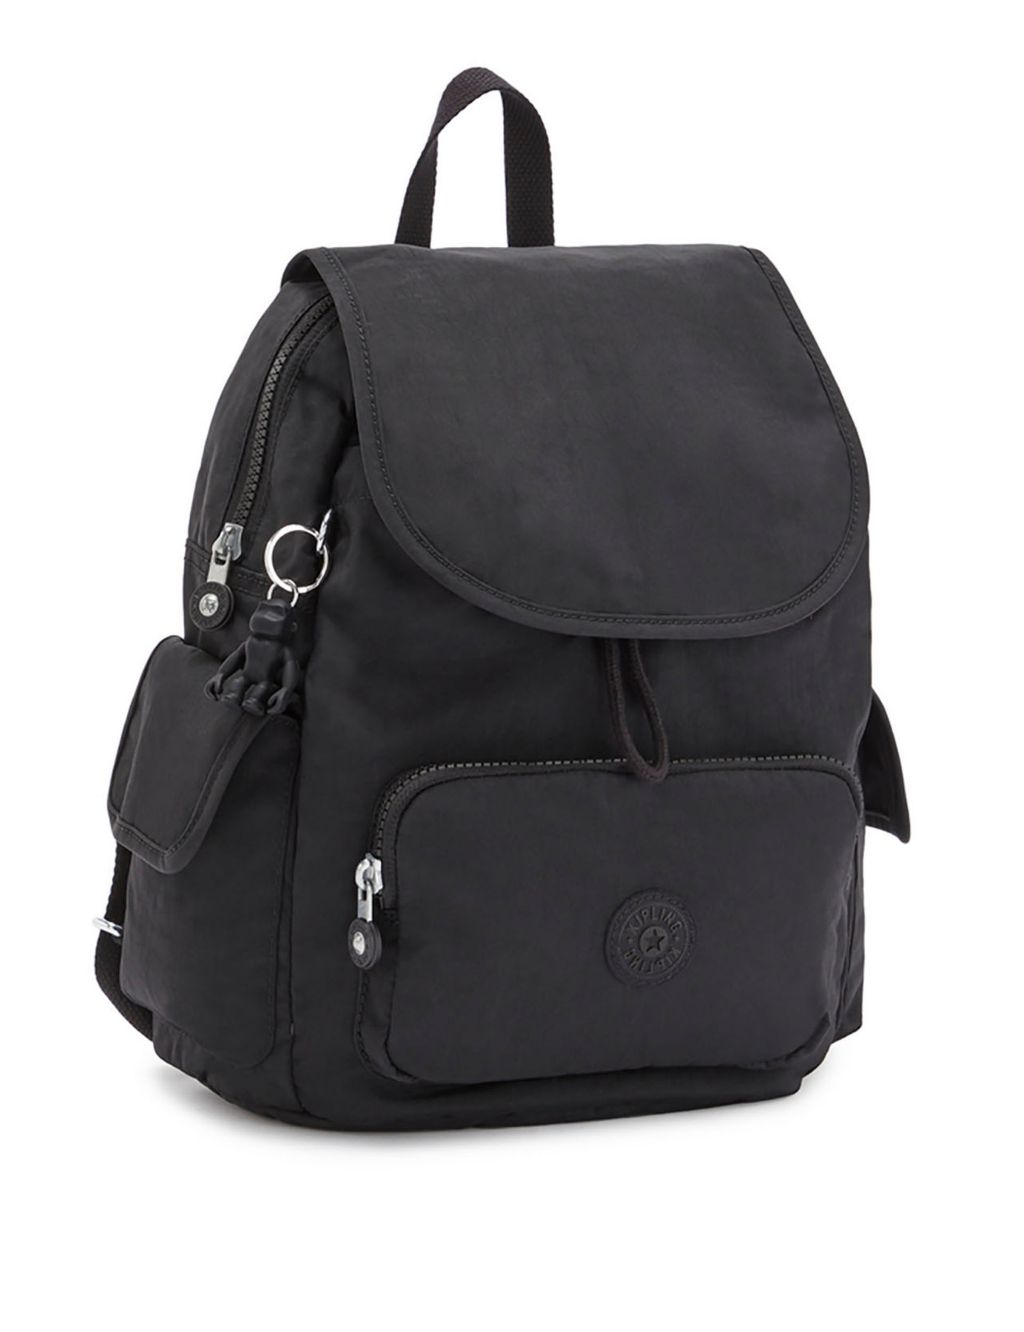 City Pack Water Resistant Backpack